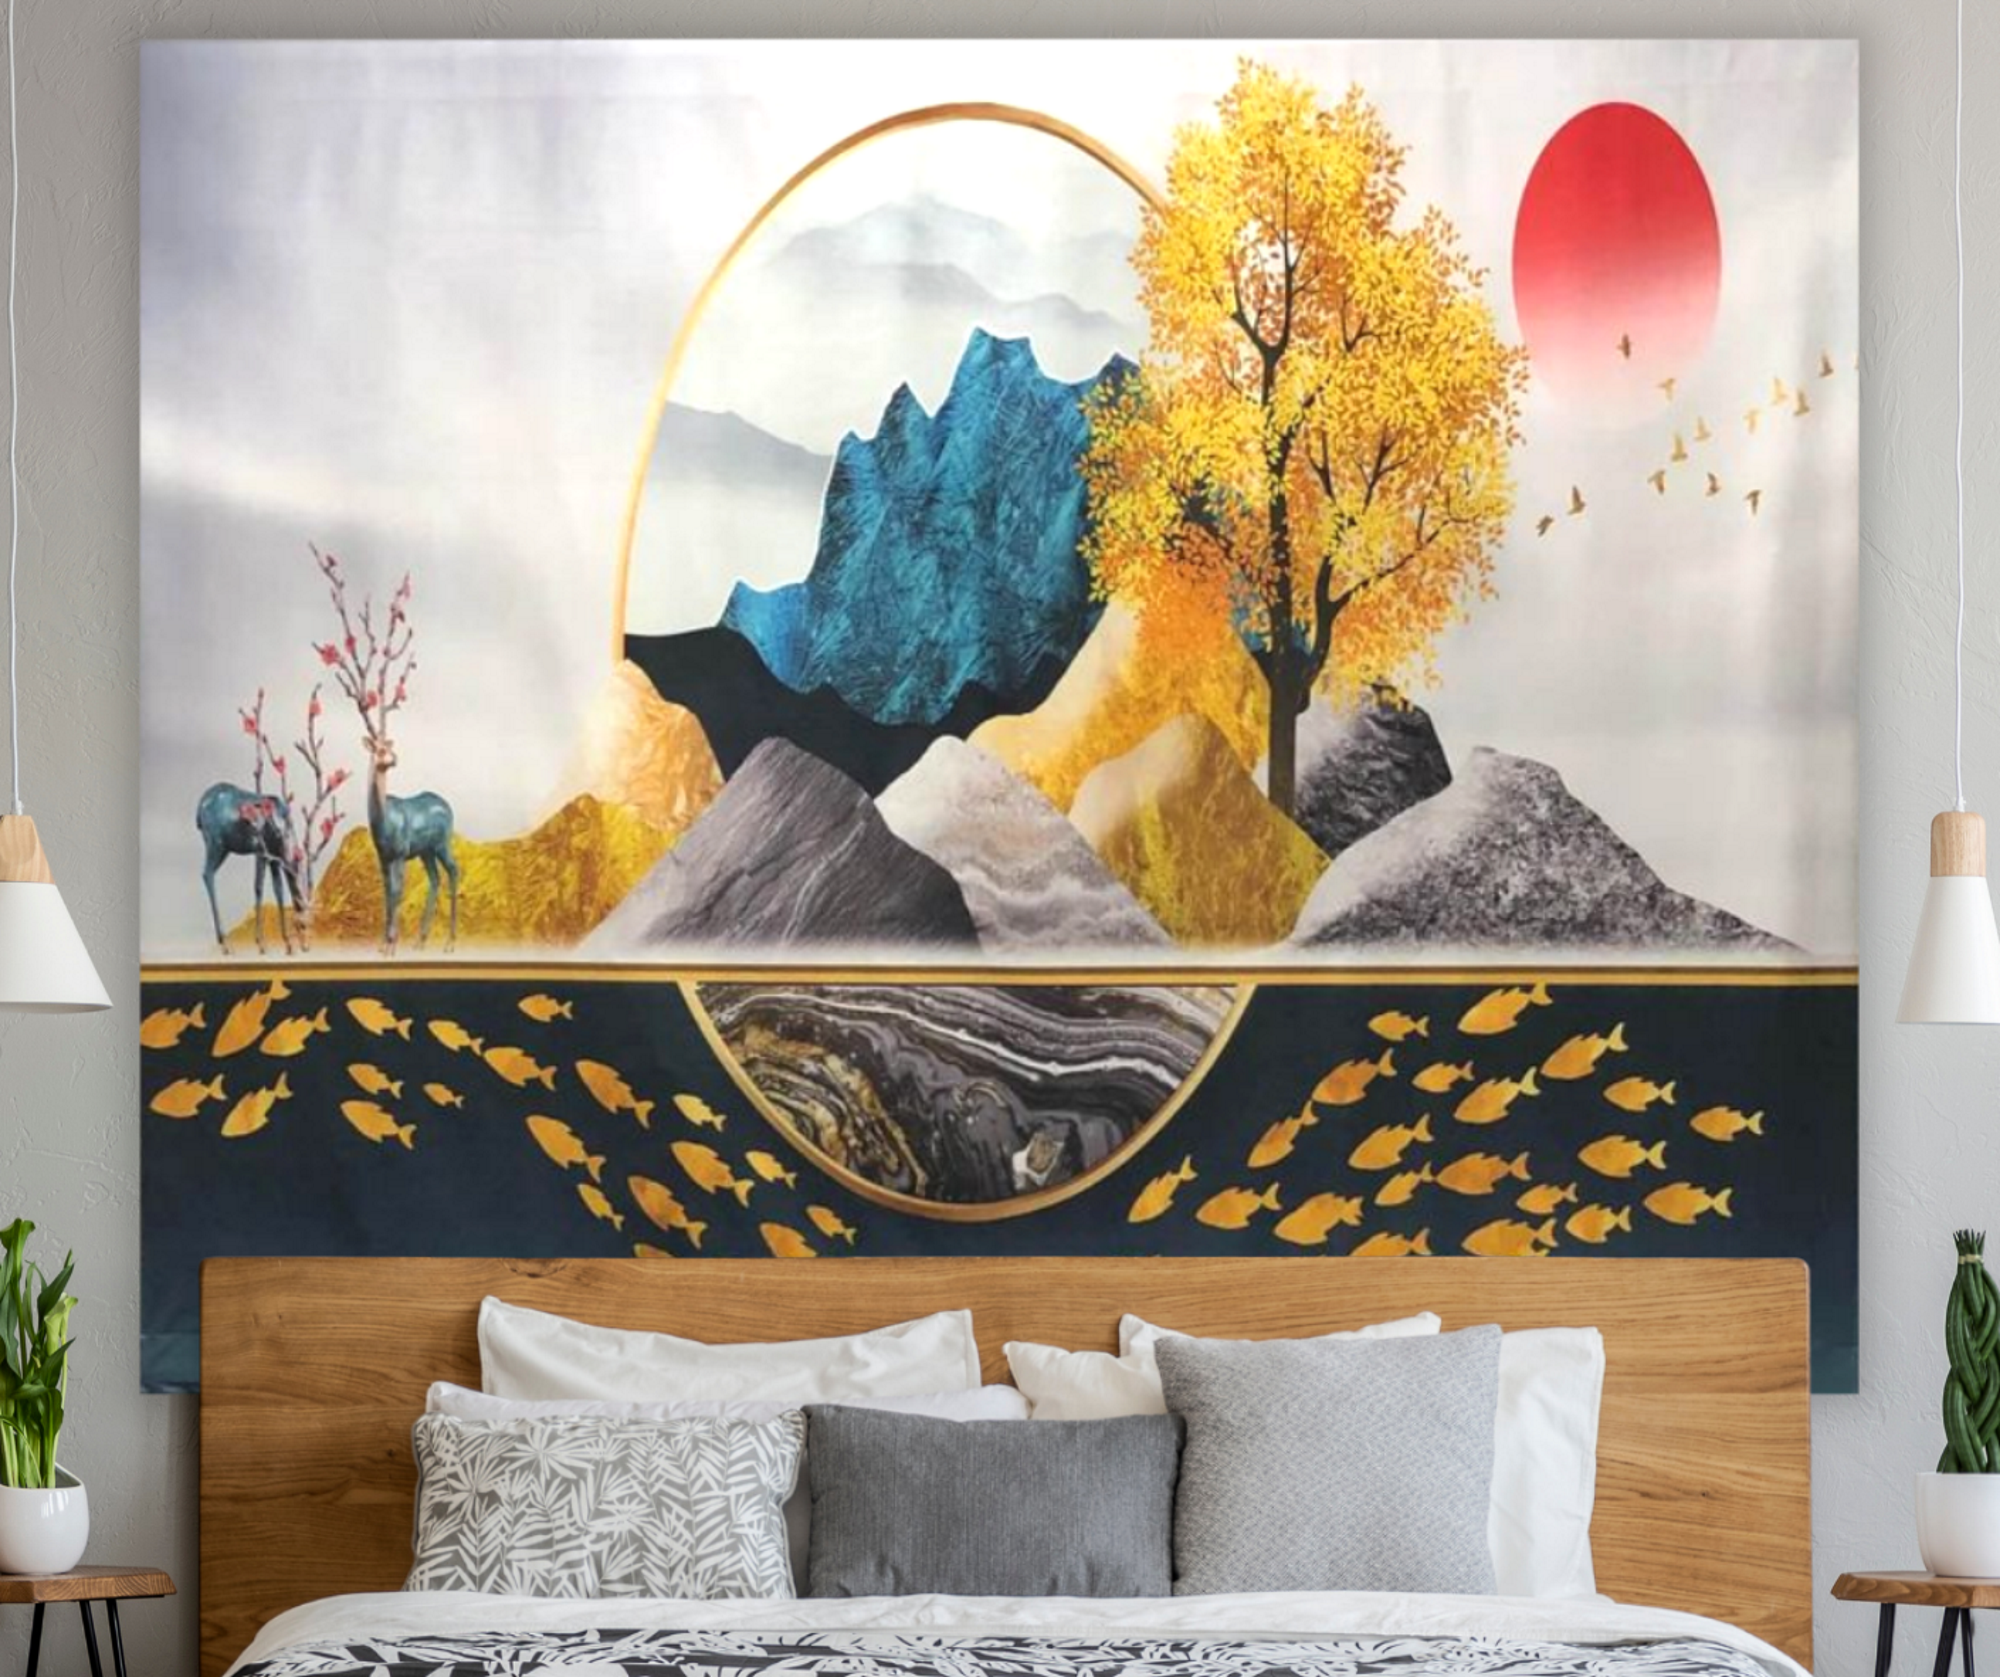 KaiSha LED Tapestry Wall Hanging; Modern Abstract Mountains Trees Scenic Art Décor Home Decoration Bedroom Dorm Living Room Nature Landscape Scene